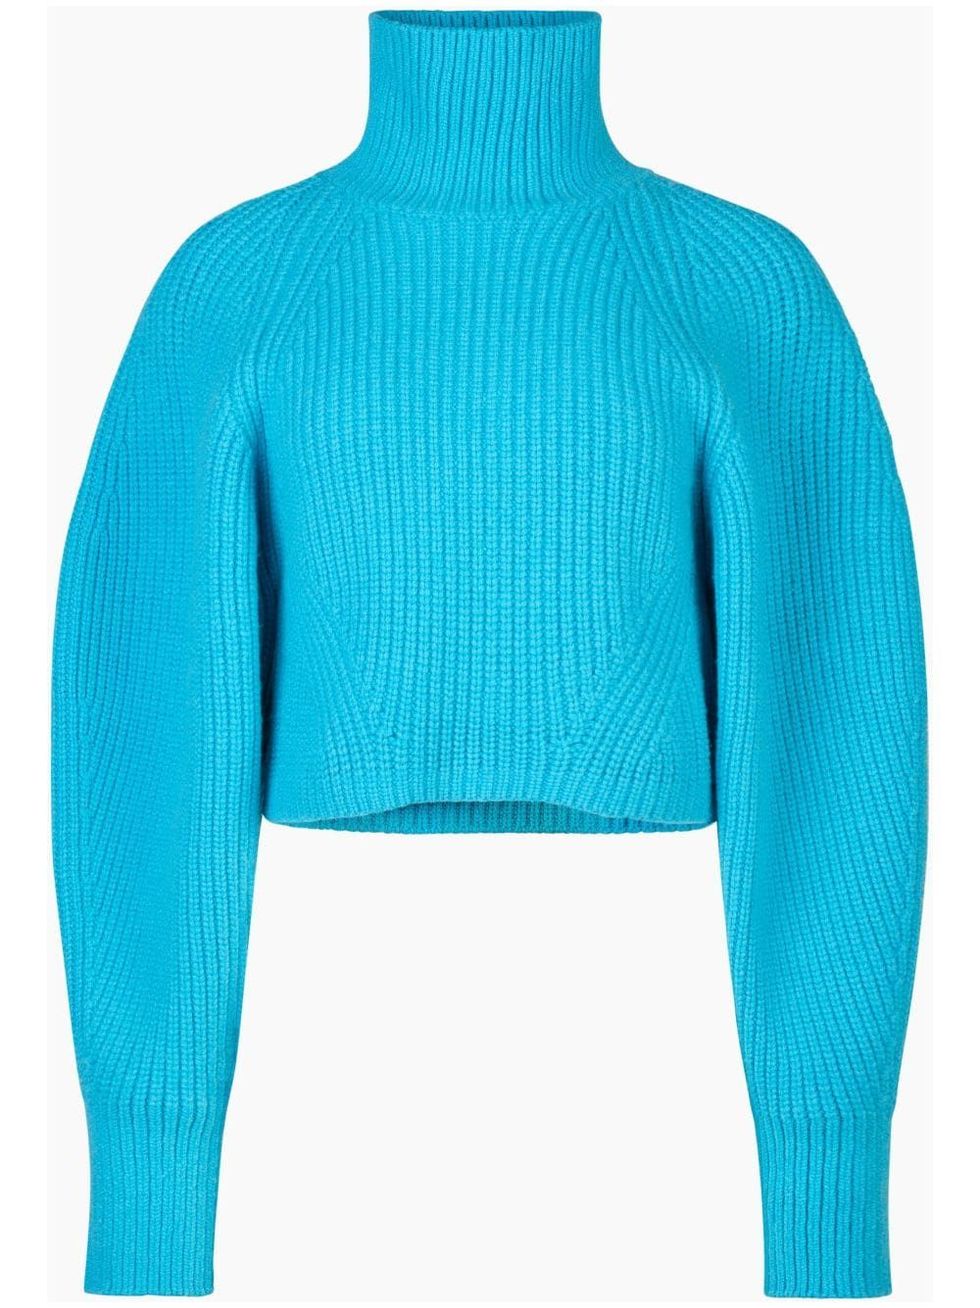 17 Best Turtleneck Jumpers to Keep You Toasty This Winter